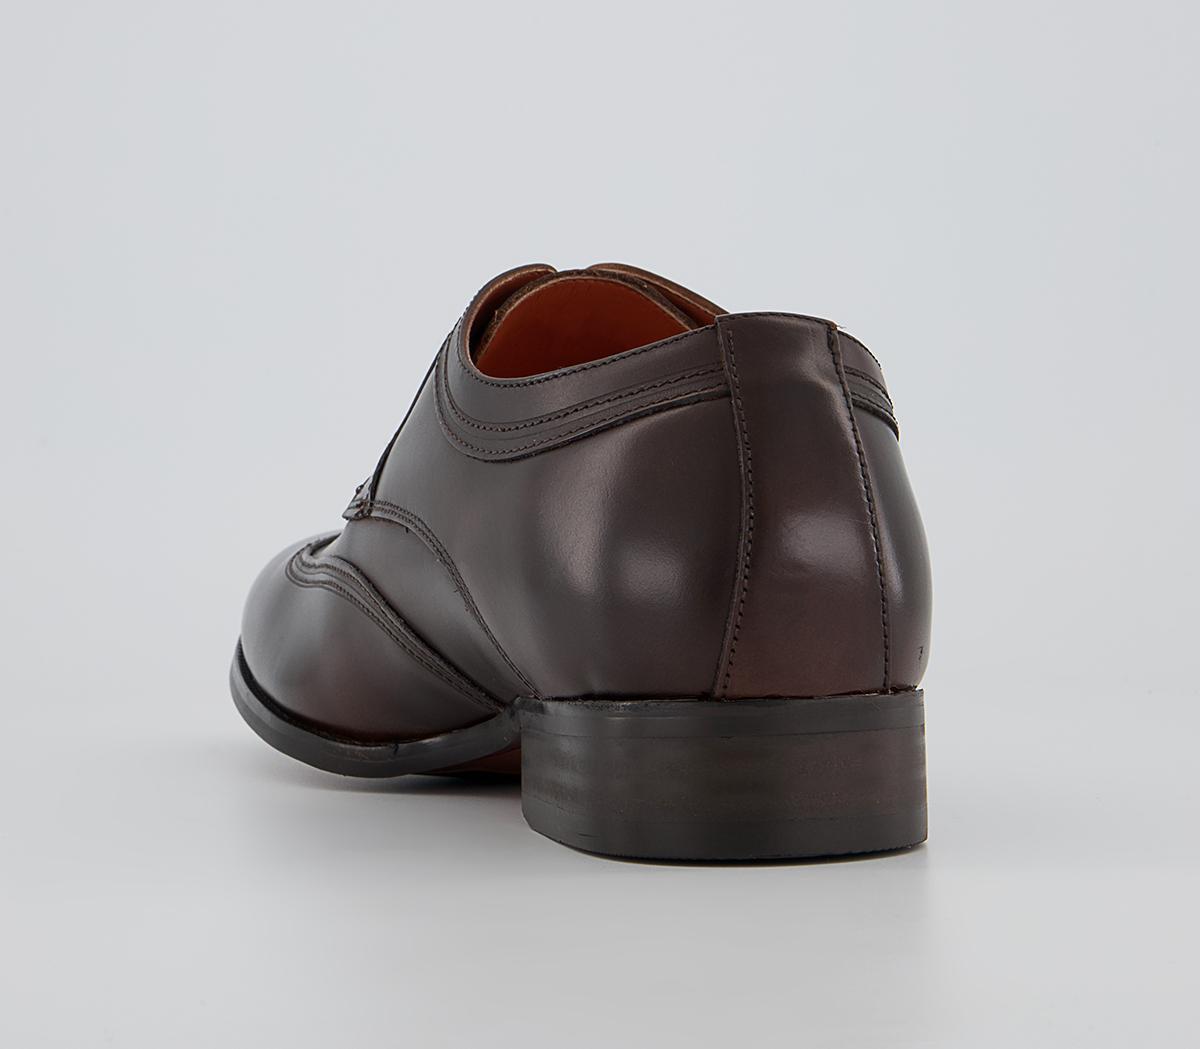 OFFICE Matayo High Shine Plain Toe Wingcap Derby Shoes Brown Leather ...